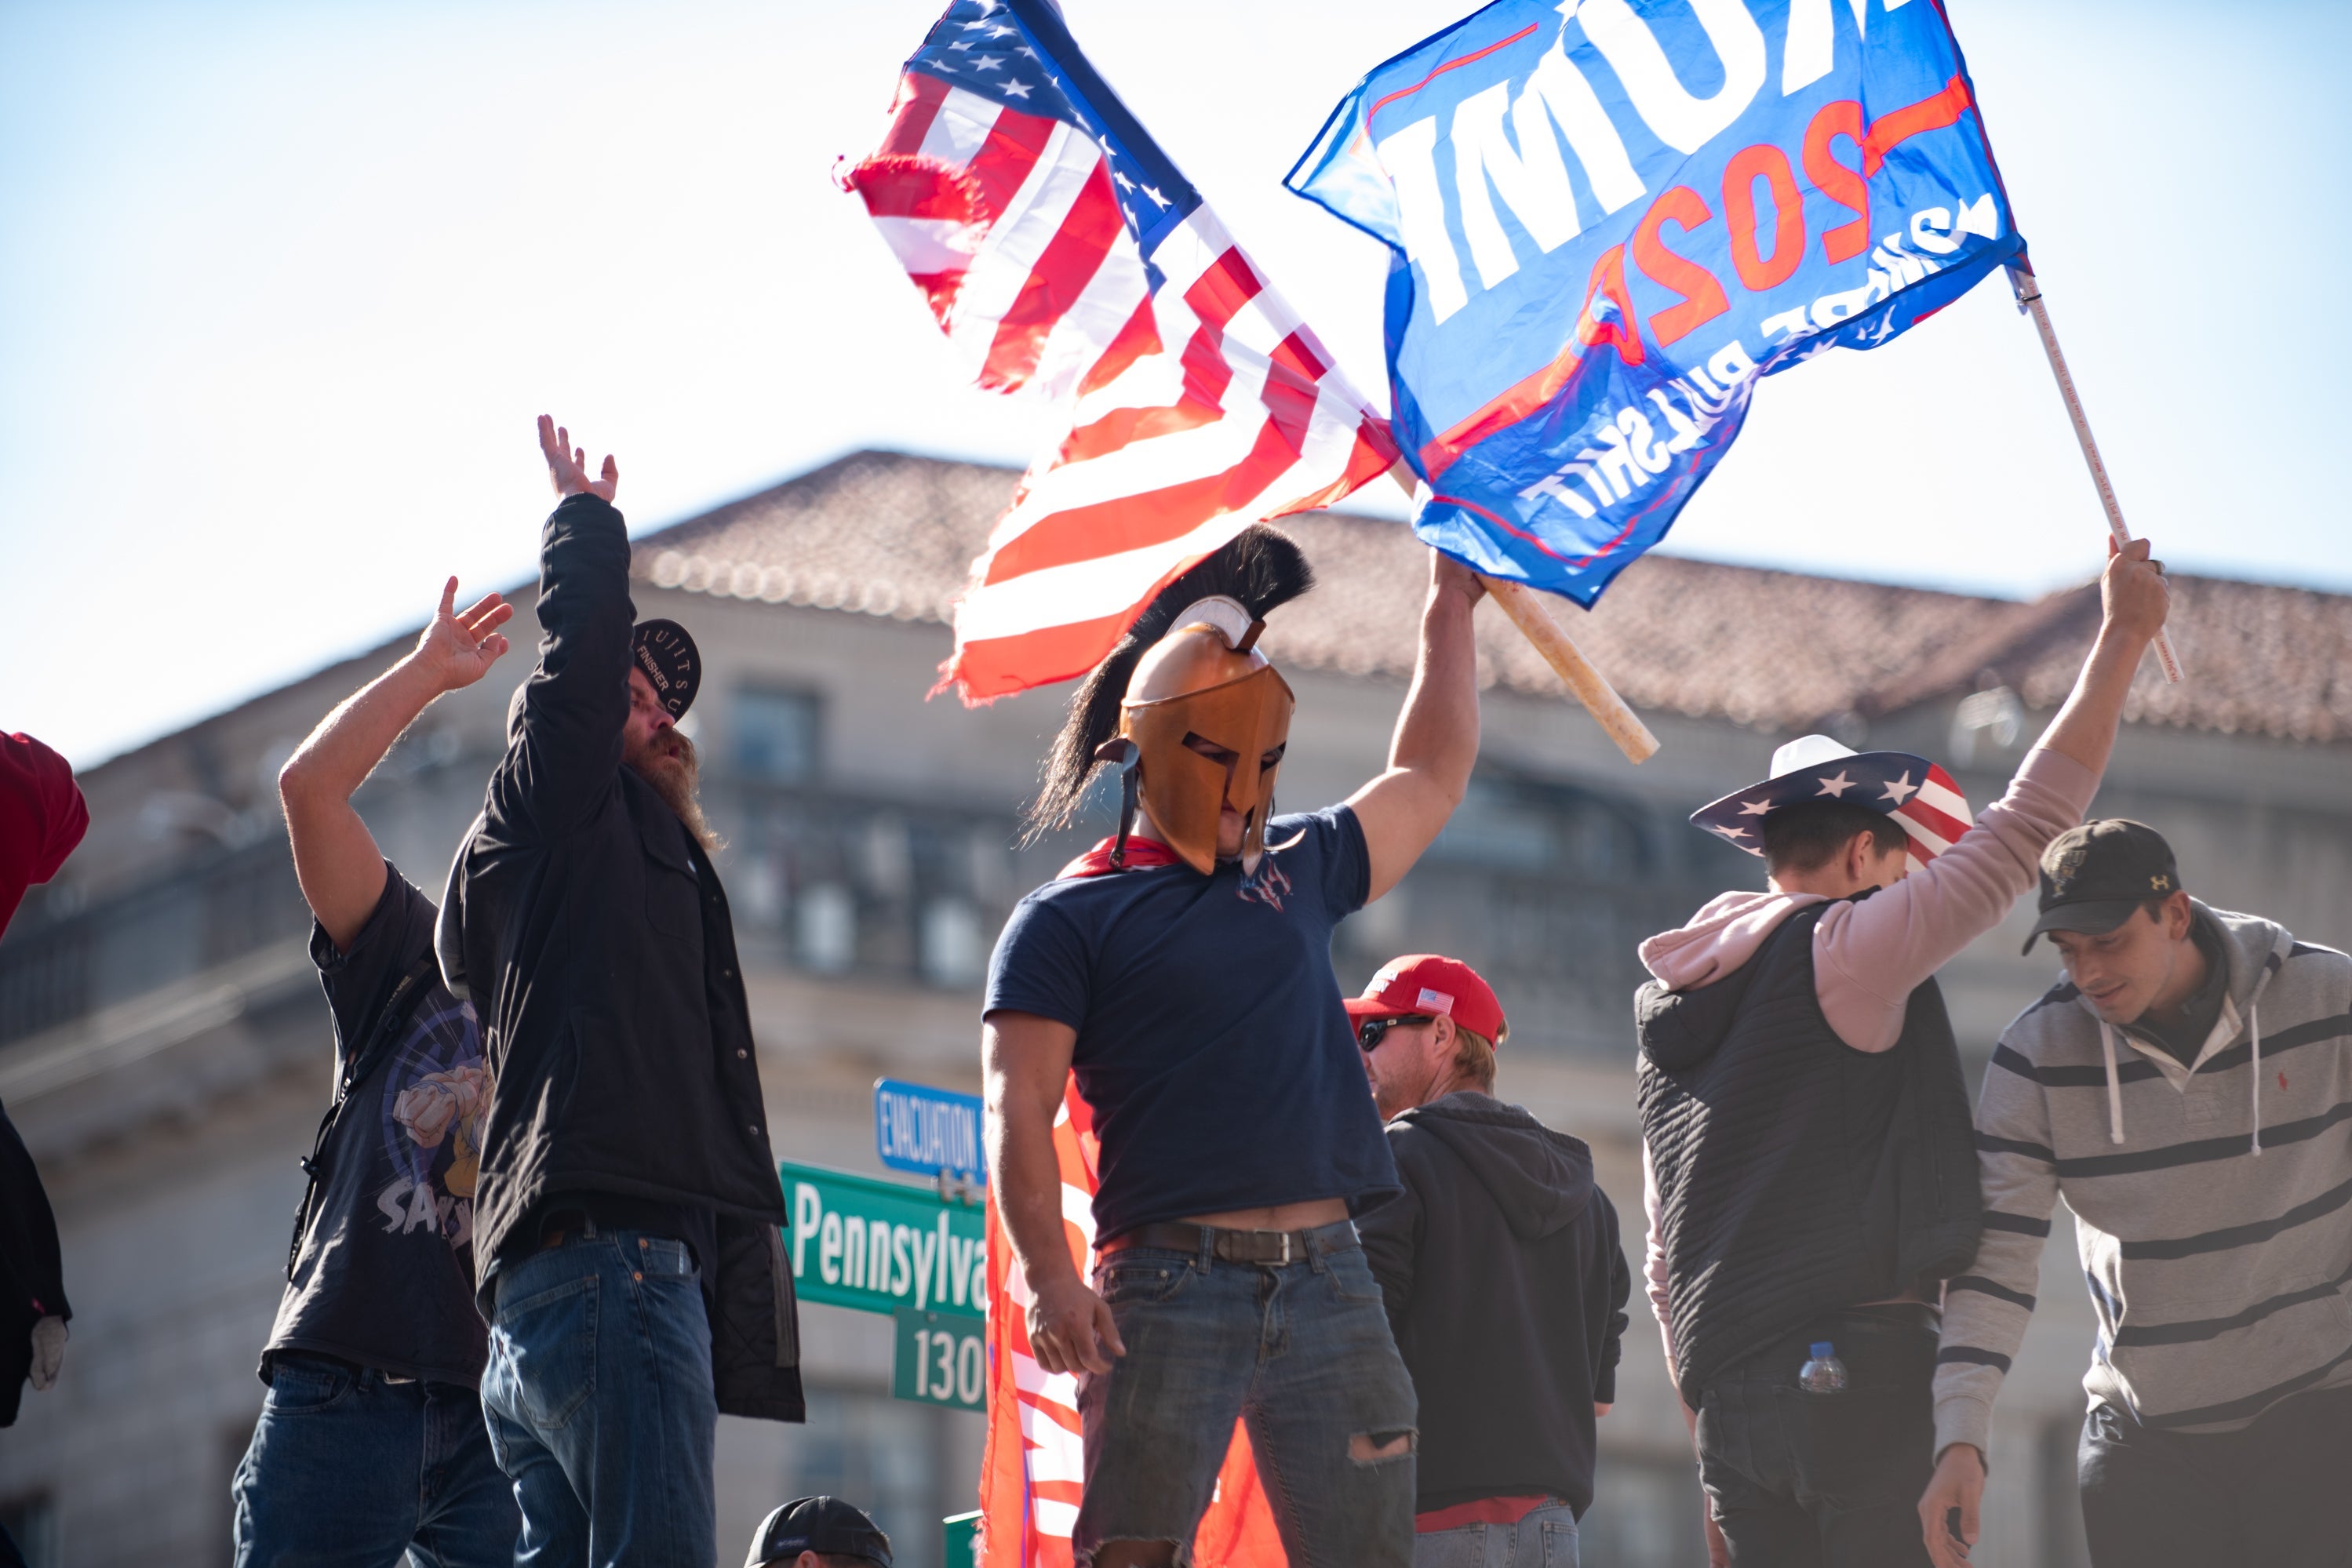 A man wearing a homemade Spartan helmet waves a flag among thousands of Trump loyalists who converged on Washington DC on Saturday for the Million MAGA March.